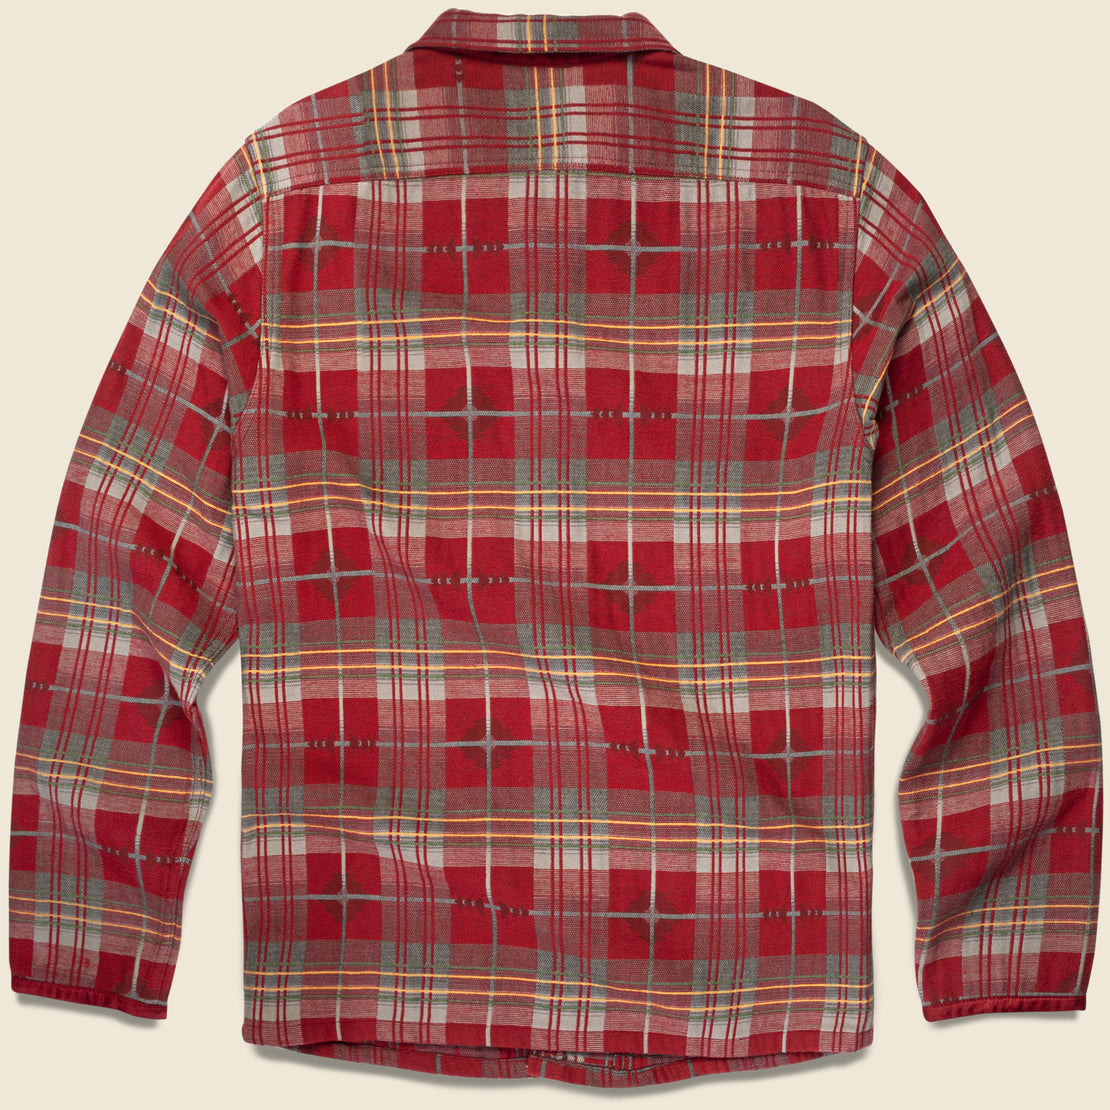 Jacquard Workshirt - Red - RRL - STAG Provisions - Tops - L/S Woven - Other Pattern